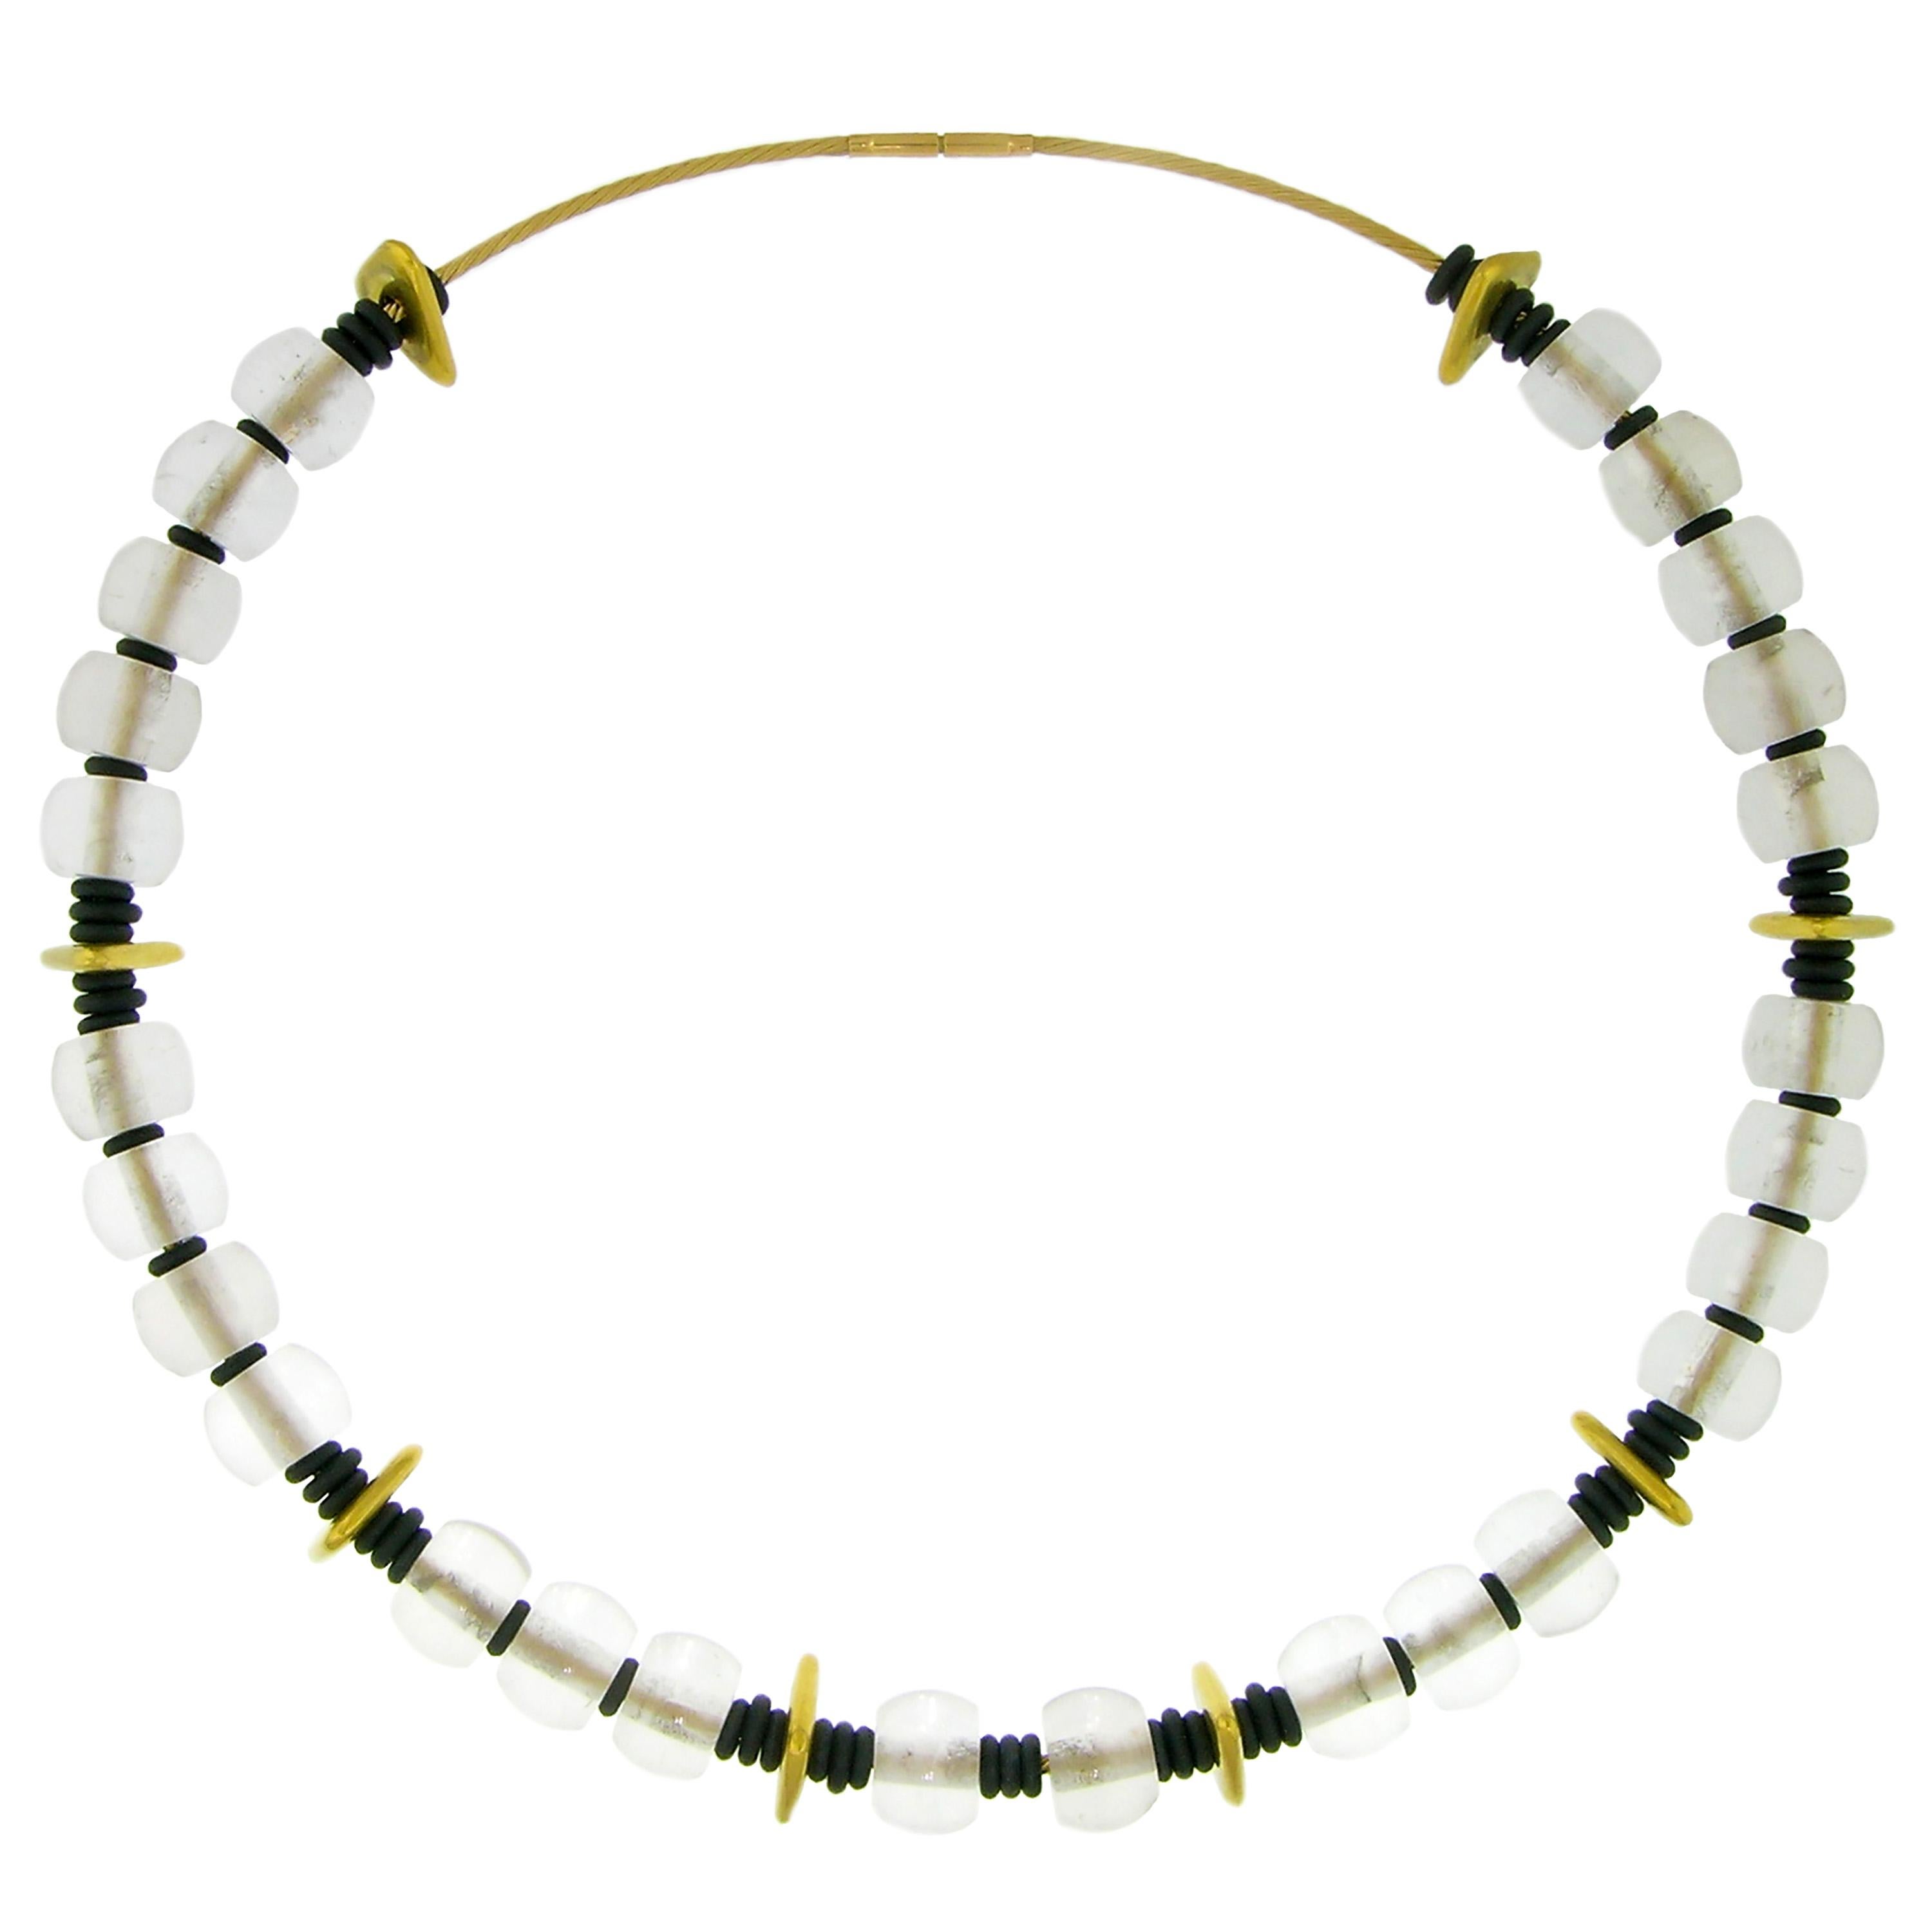 This gemstone beaded necklace features totally transparent, barrel shaped rock crystal beads accentuated by 20kt handmade gold triangles and unexpectedly delightful black neoprene spacers.

This whimsically conceived necklace allows for never-ending